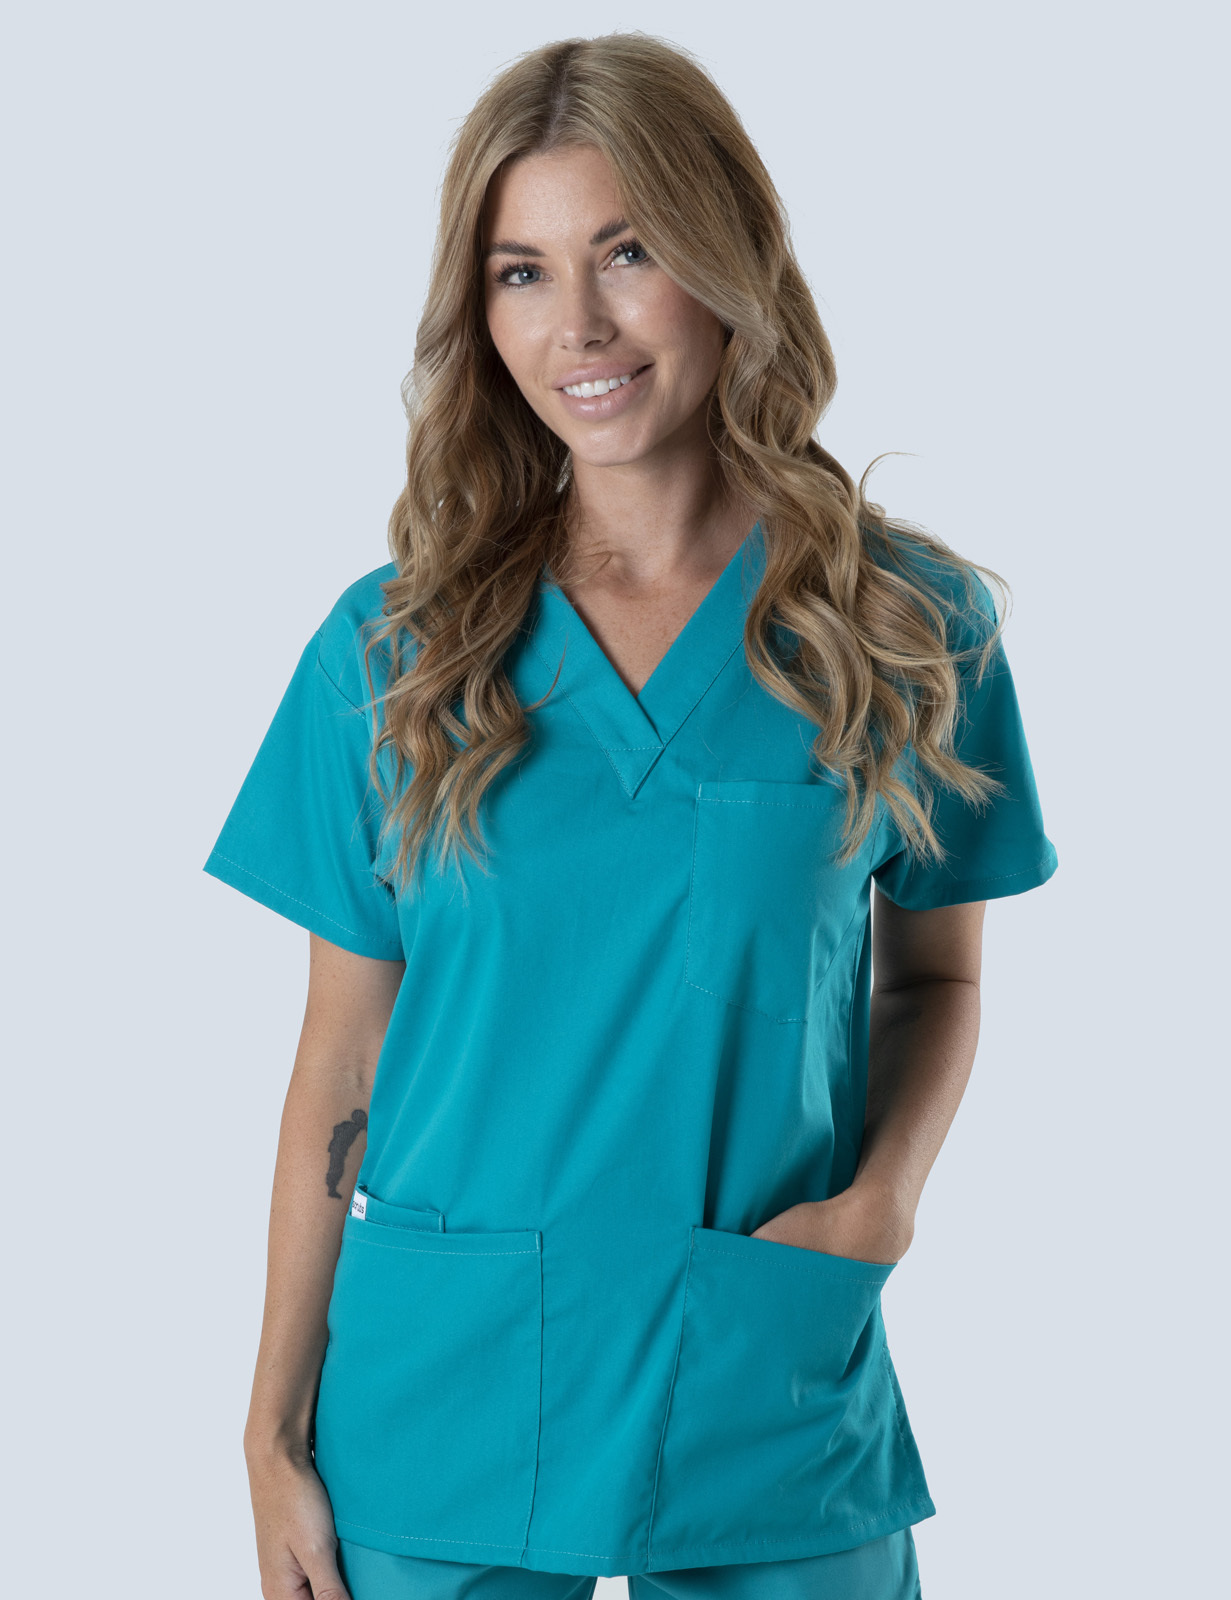 Metro South Oral Health - Dental Assistants (4 Pocket Top in Teal incl Logos)